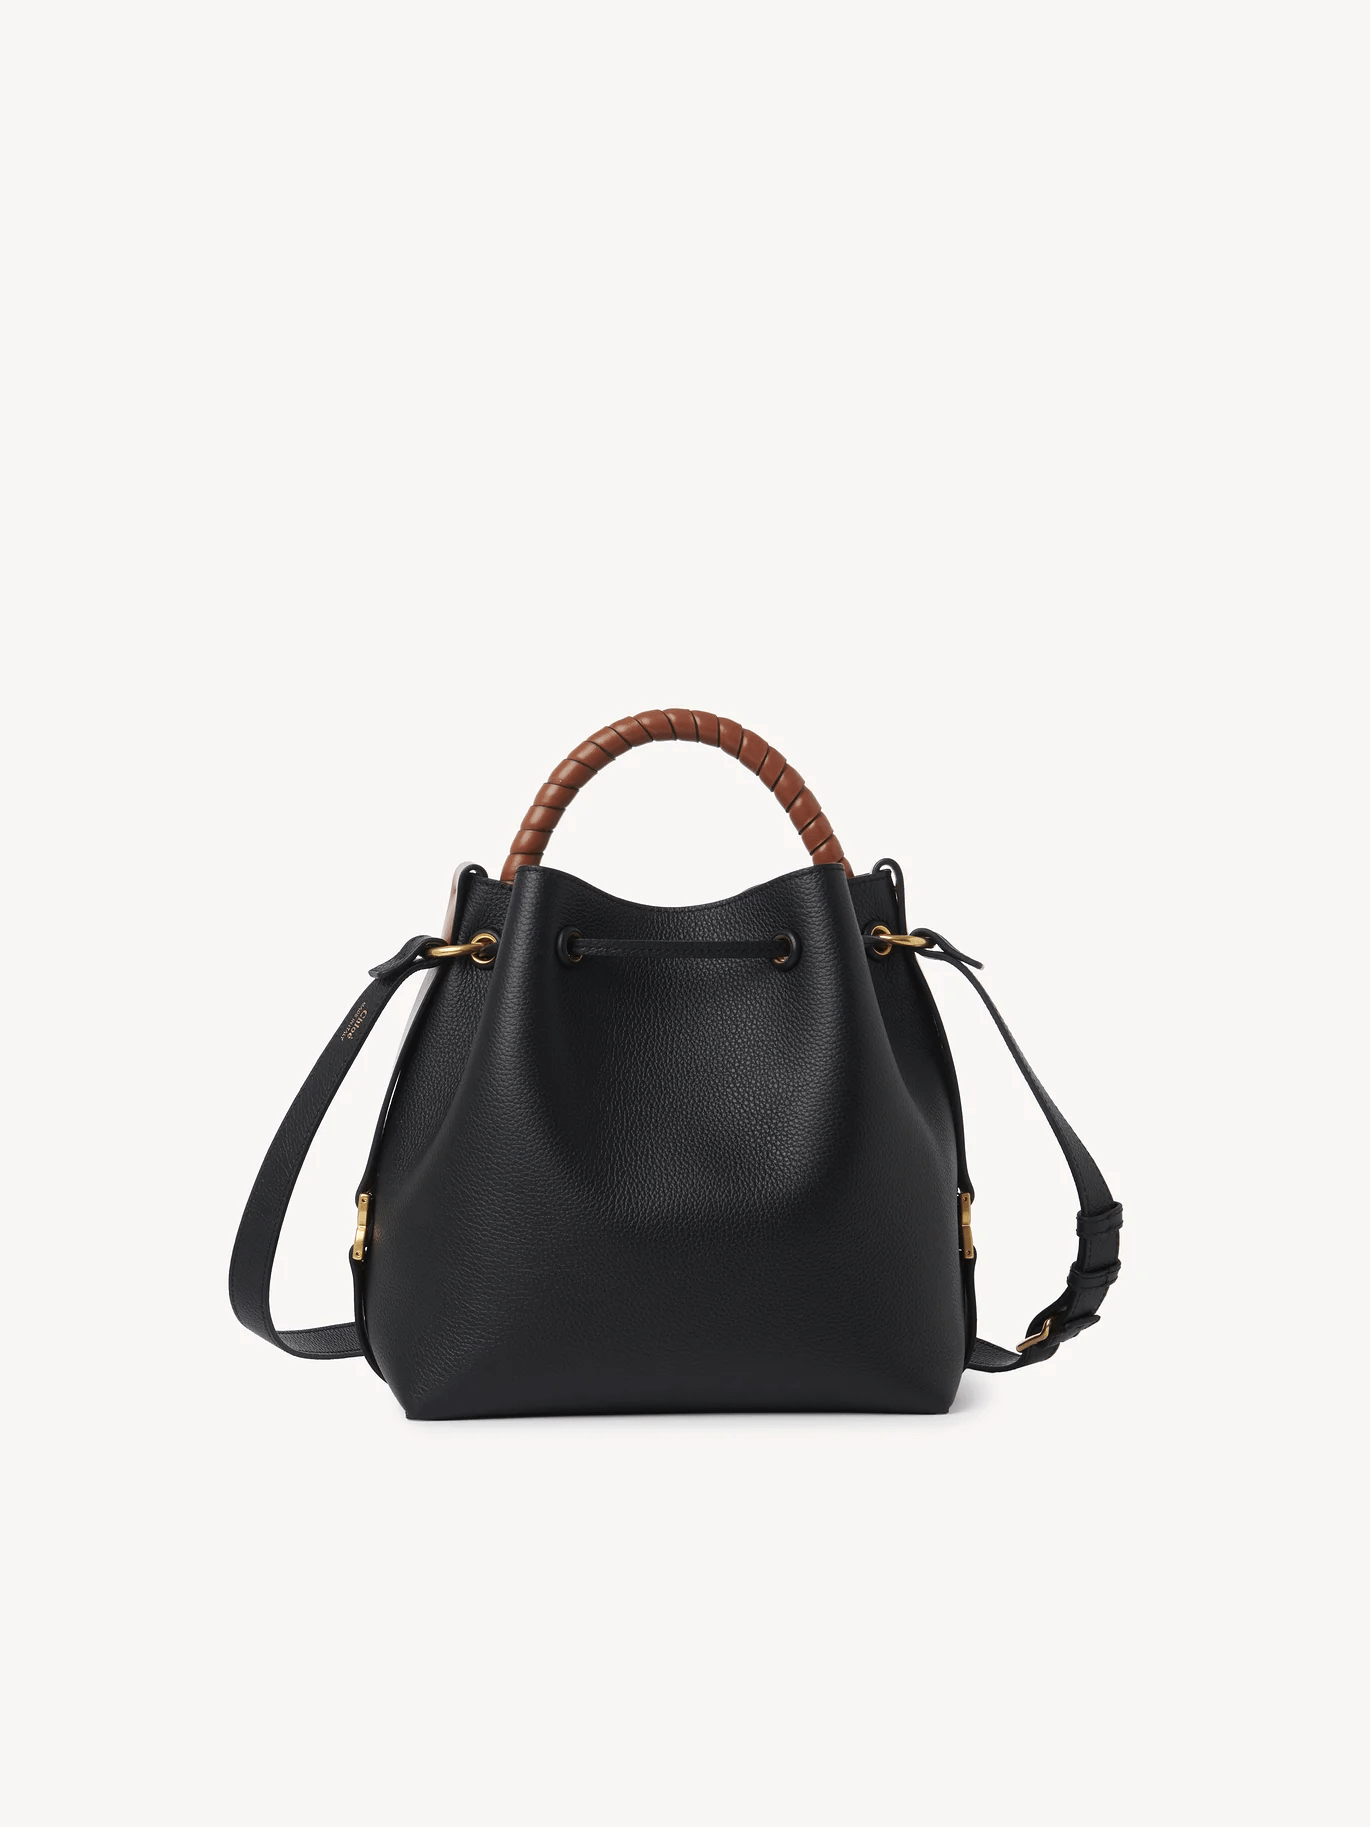 Chloé Marcie Bucket Bag in Black available at The New Trend Australia.